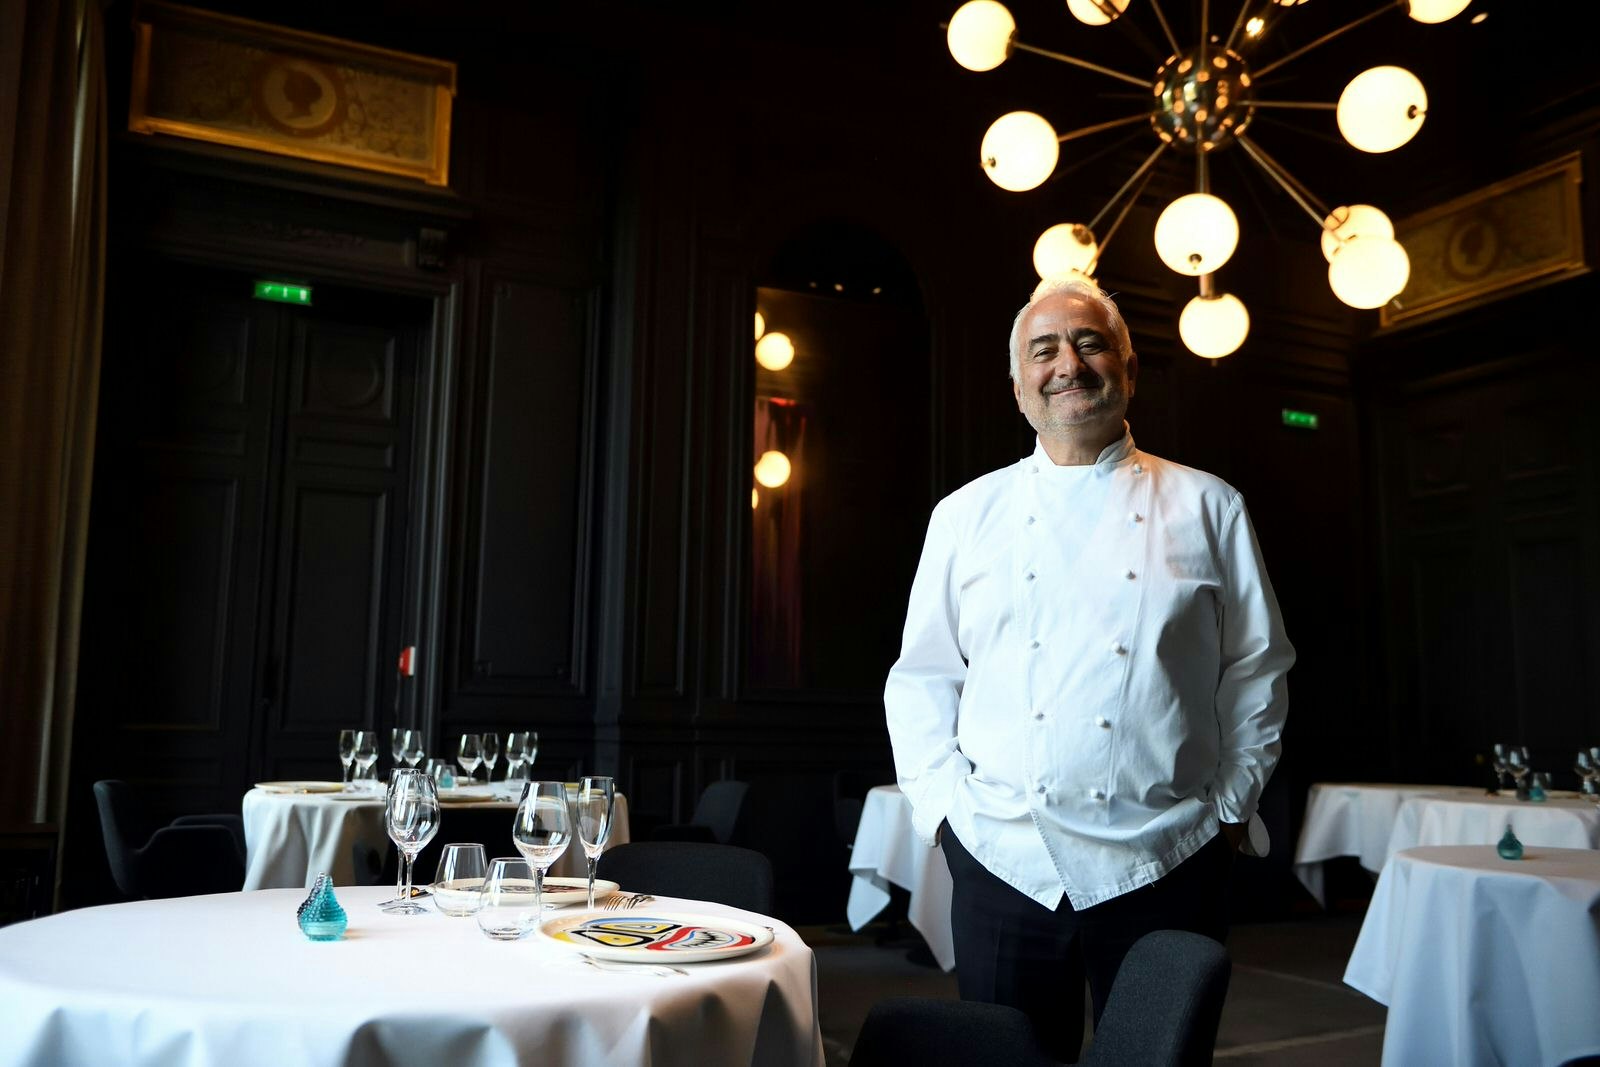 French chef Guy Savoy smiles at the camera wearing his chef's jacket in the dining room of his Michelin three-starred restaurant Guy Savoy de Paris in the Monnaie de Paris. The dark dining room is illuminated by an unusual, globular light fixture. 